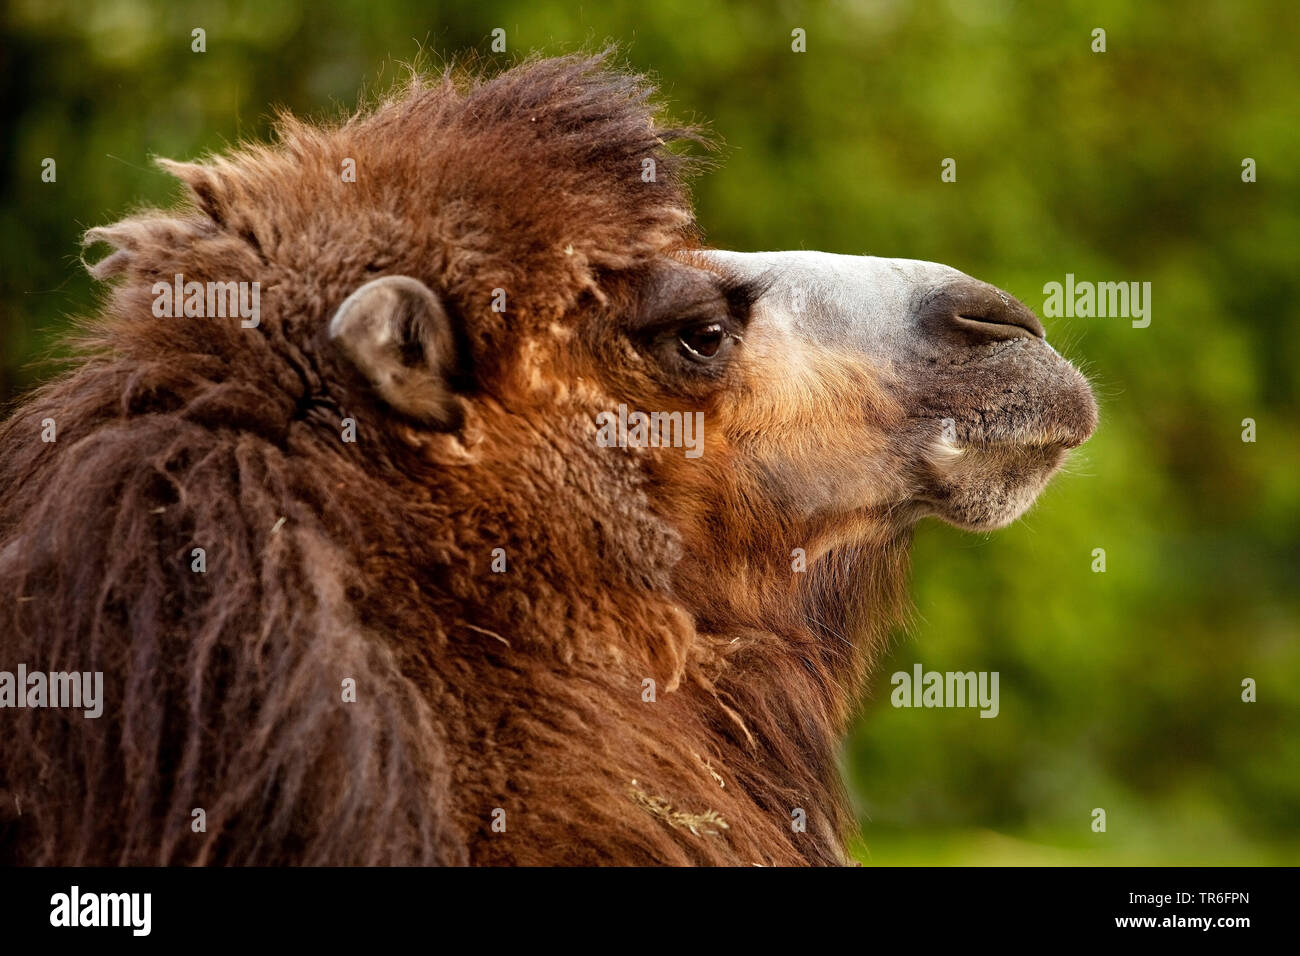 Bactrian camel, due-humped camel (Camelus bactrianus), ritratto, Germania Foto Stock